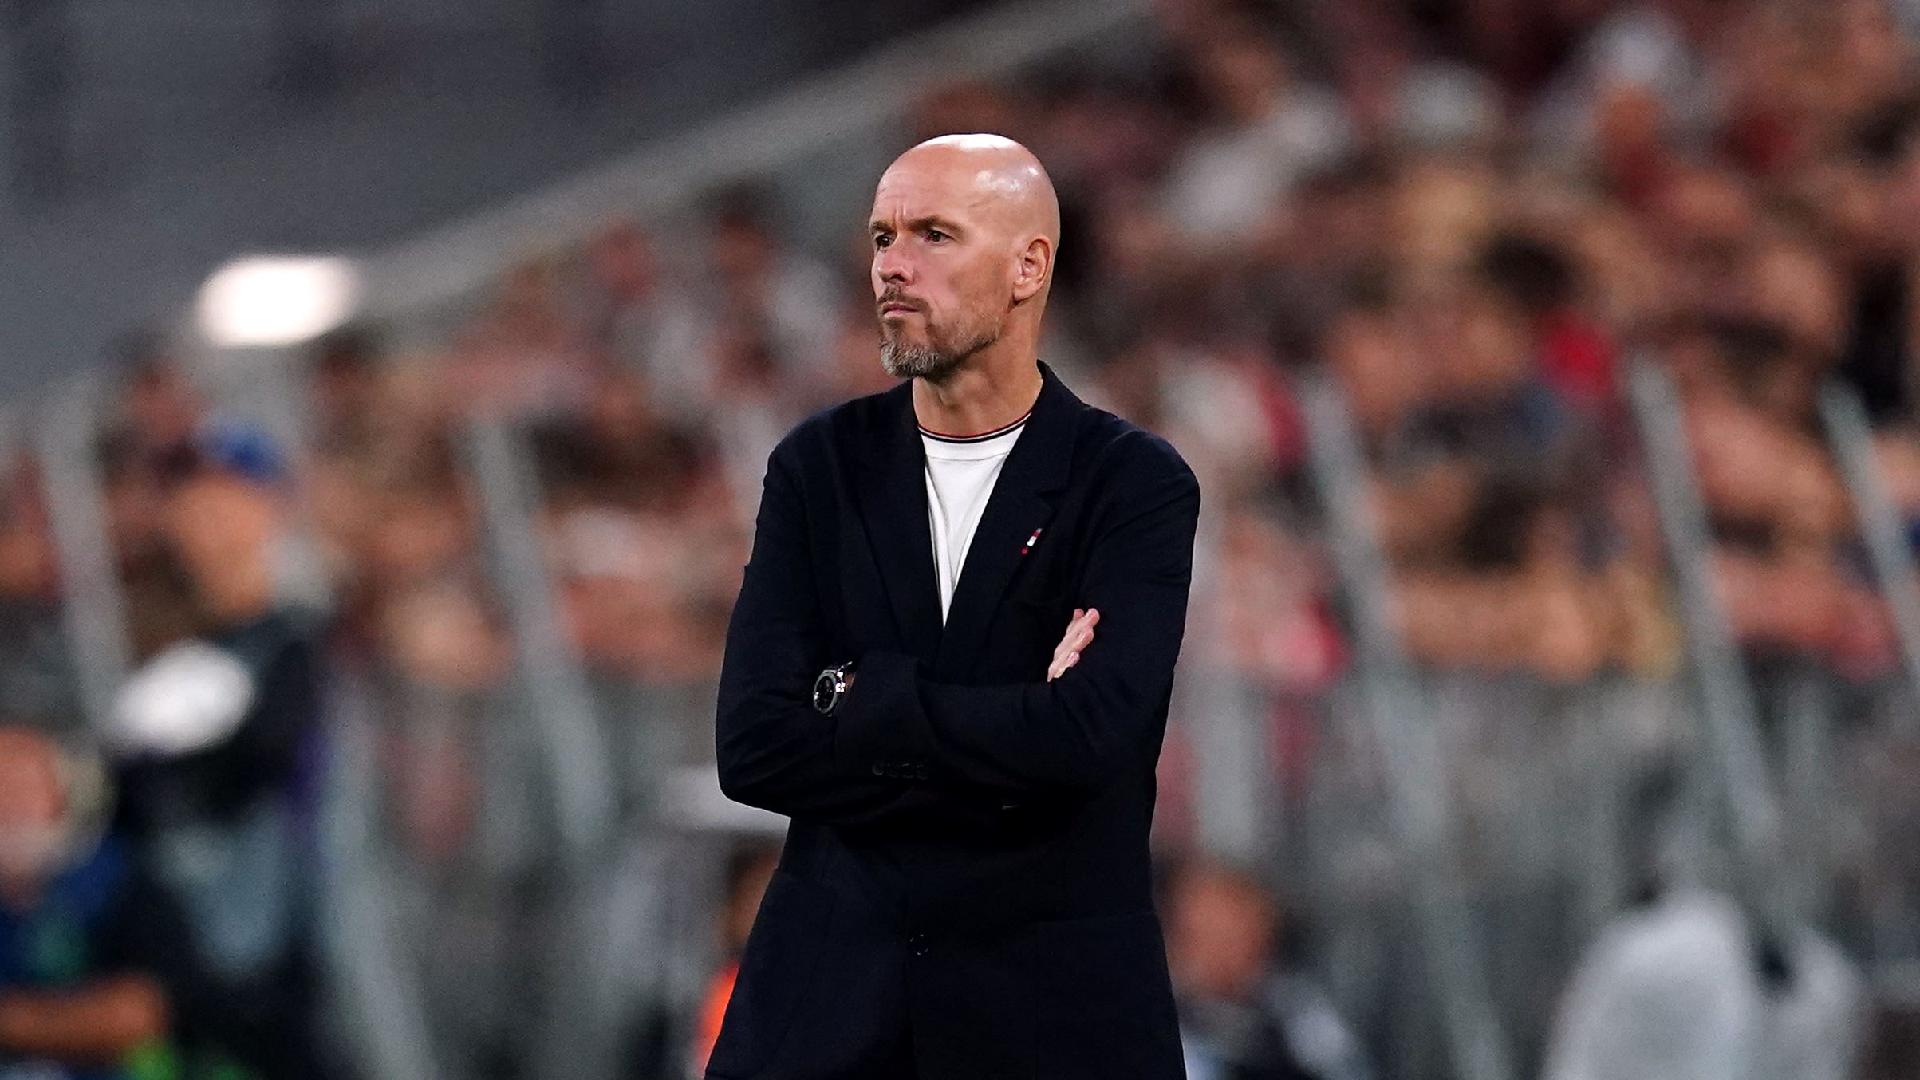 Erik Ten Hag: Man Utd players are fighting together to turn around poor form